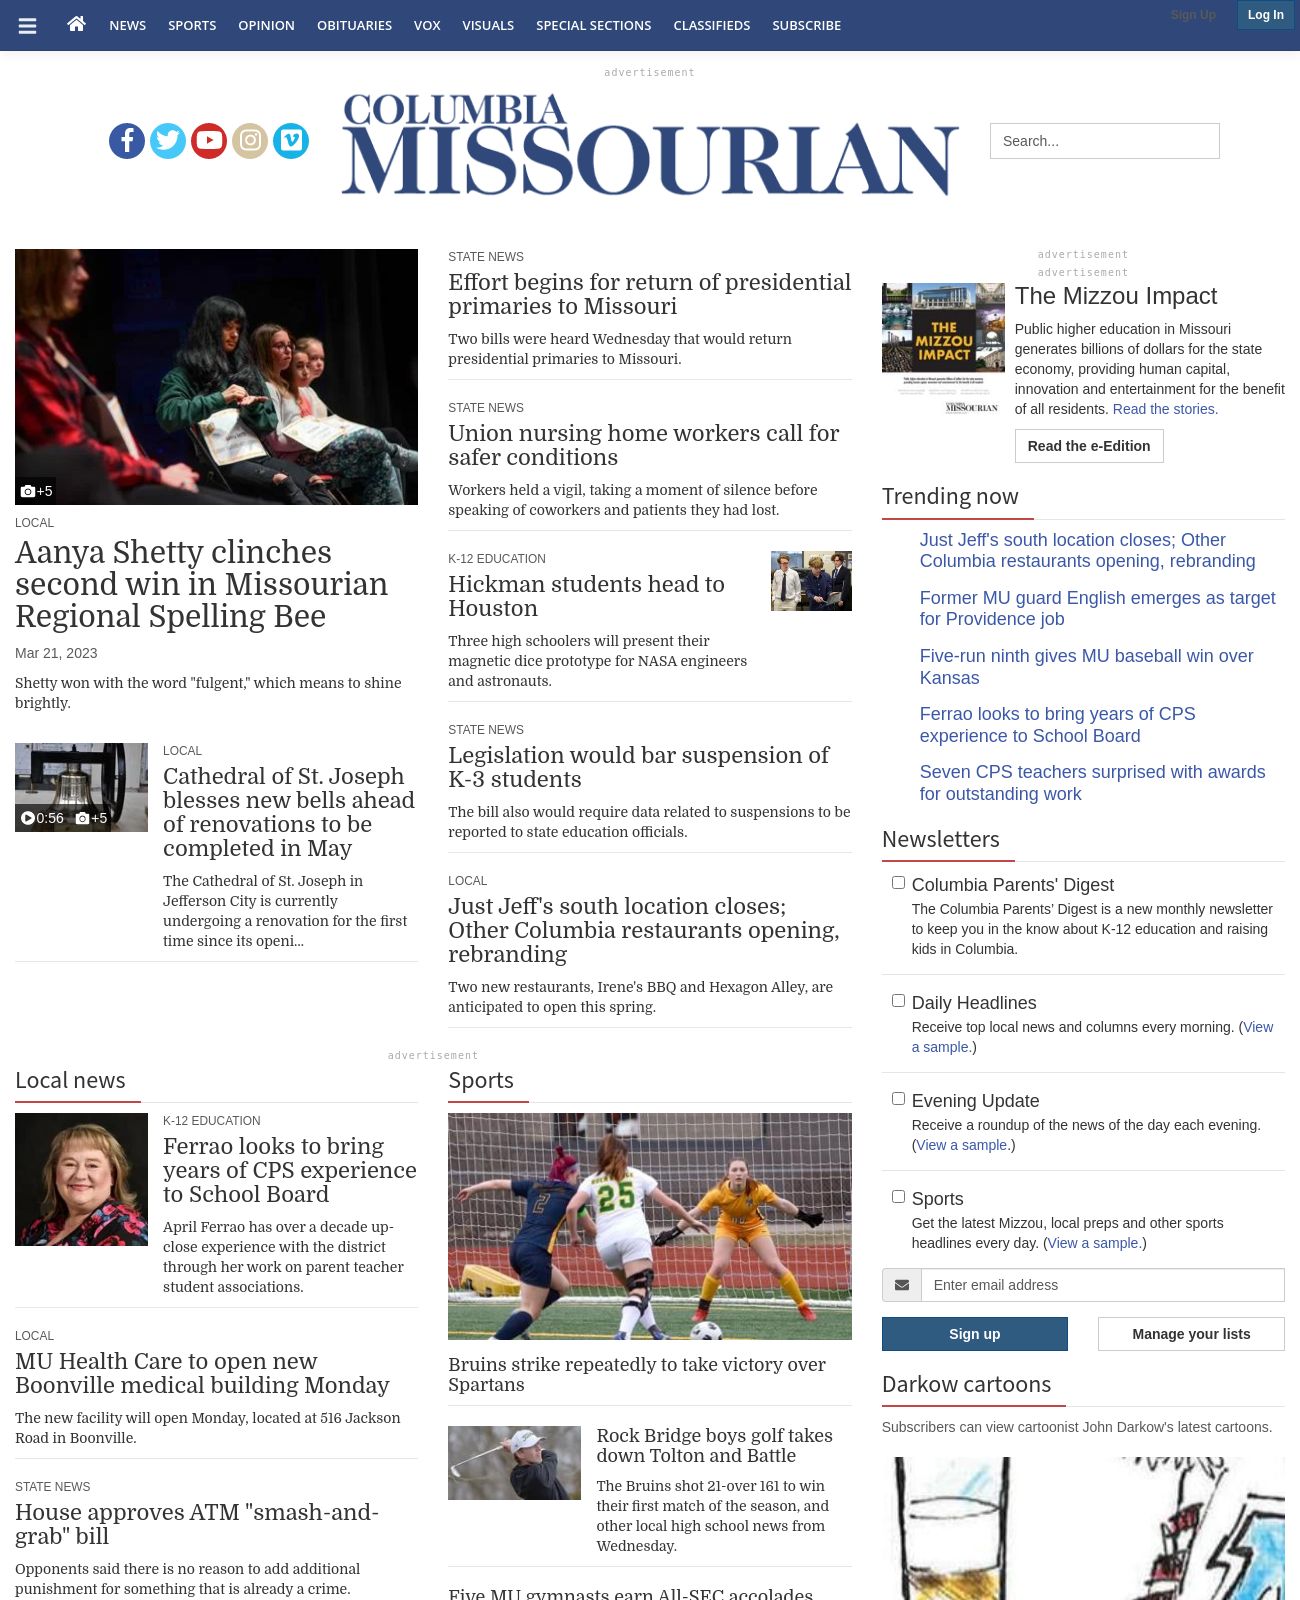 Columbia Missourian at 2023-03-23 05:38:45-05:00 local time